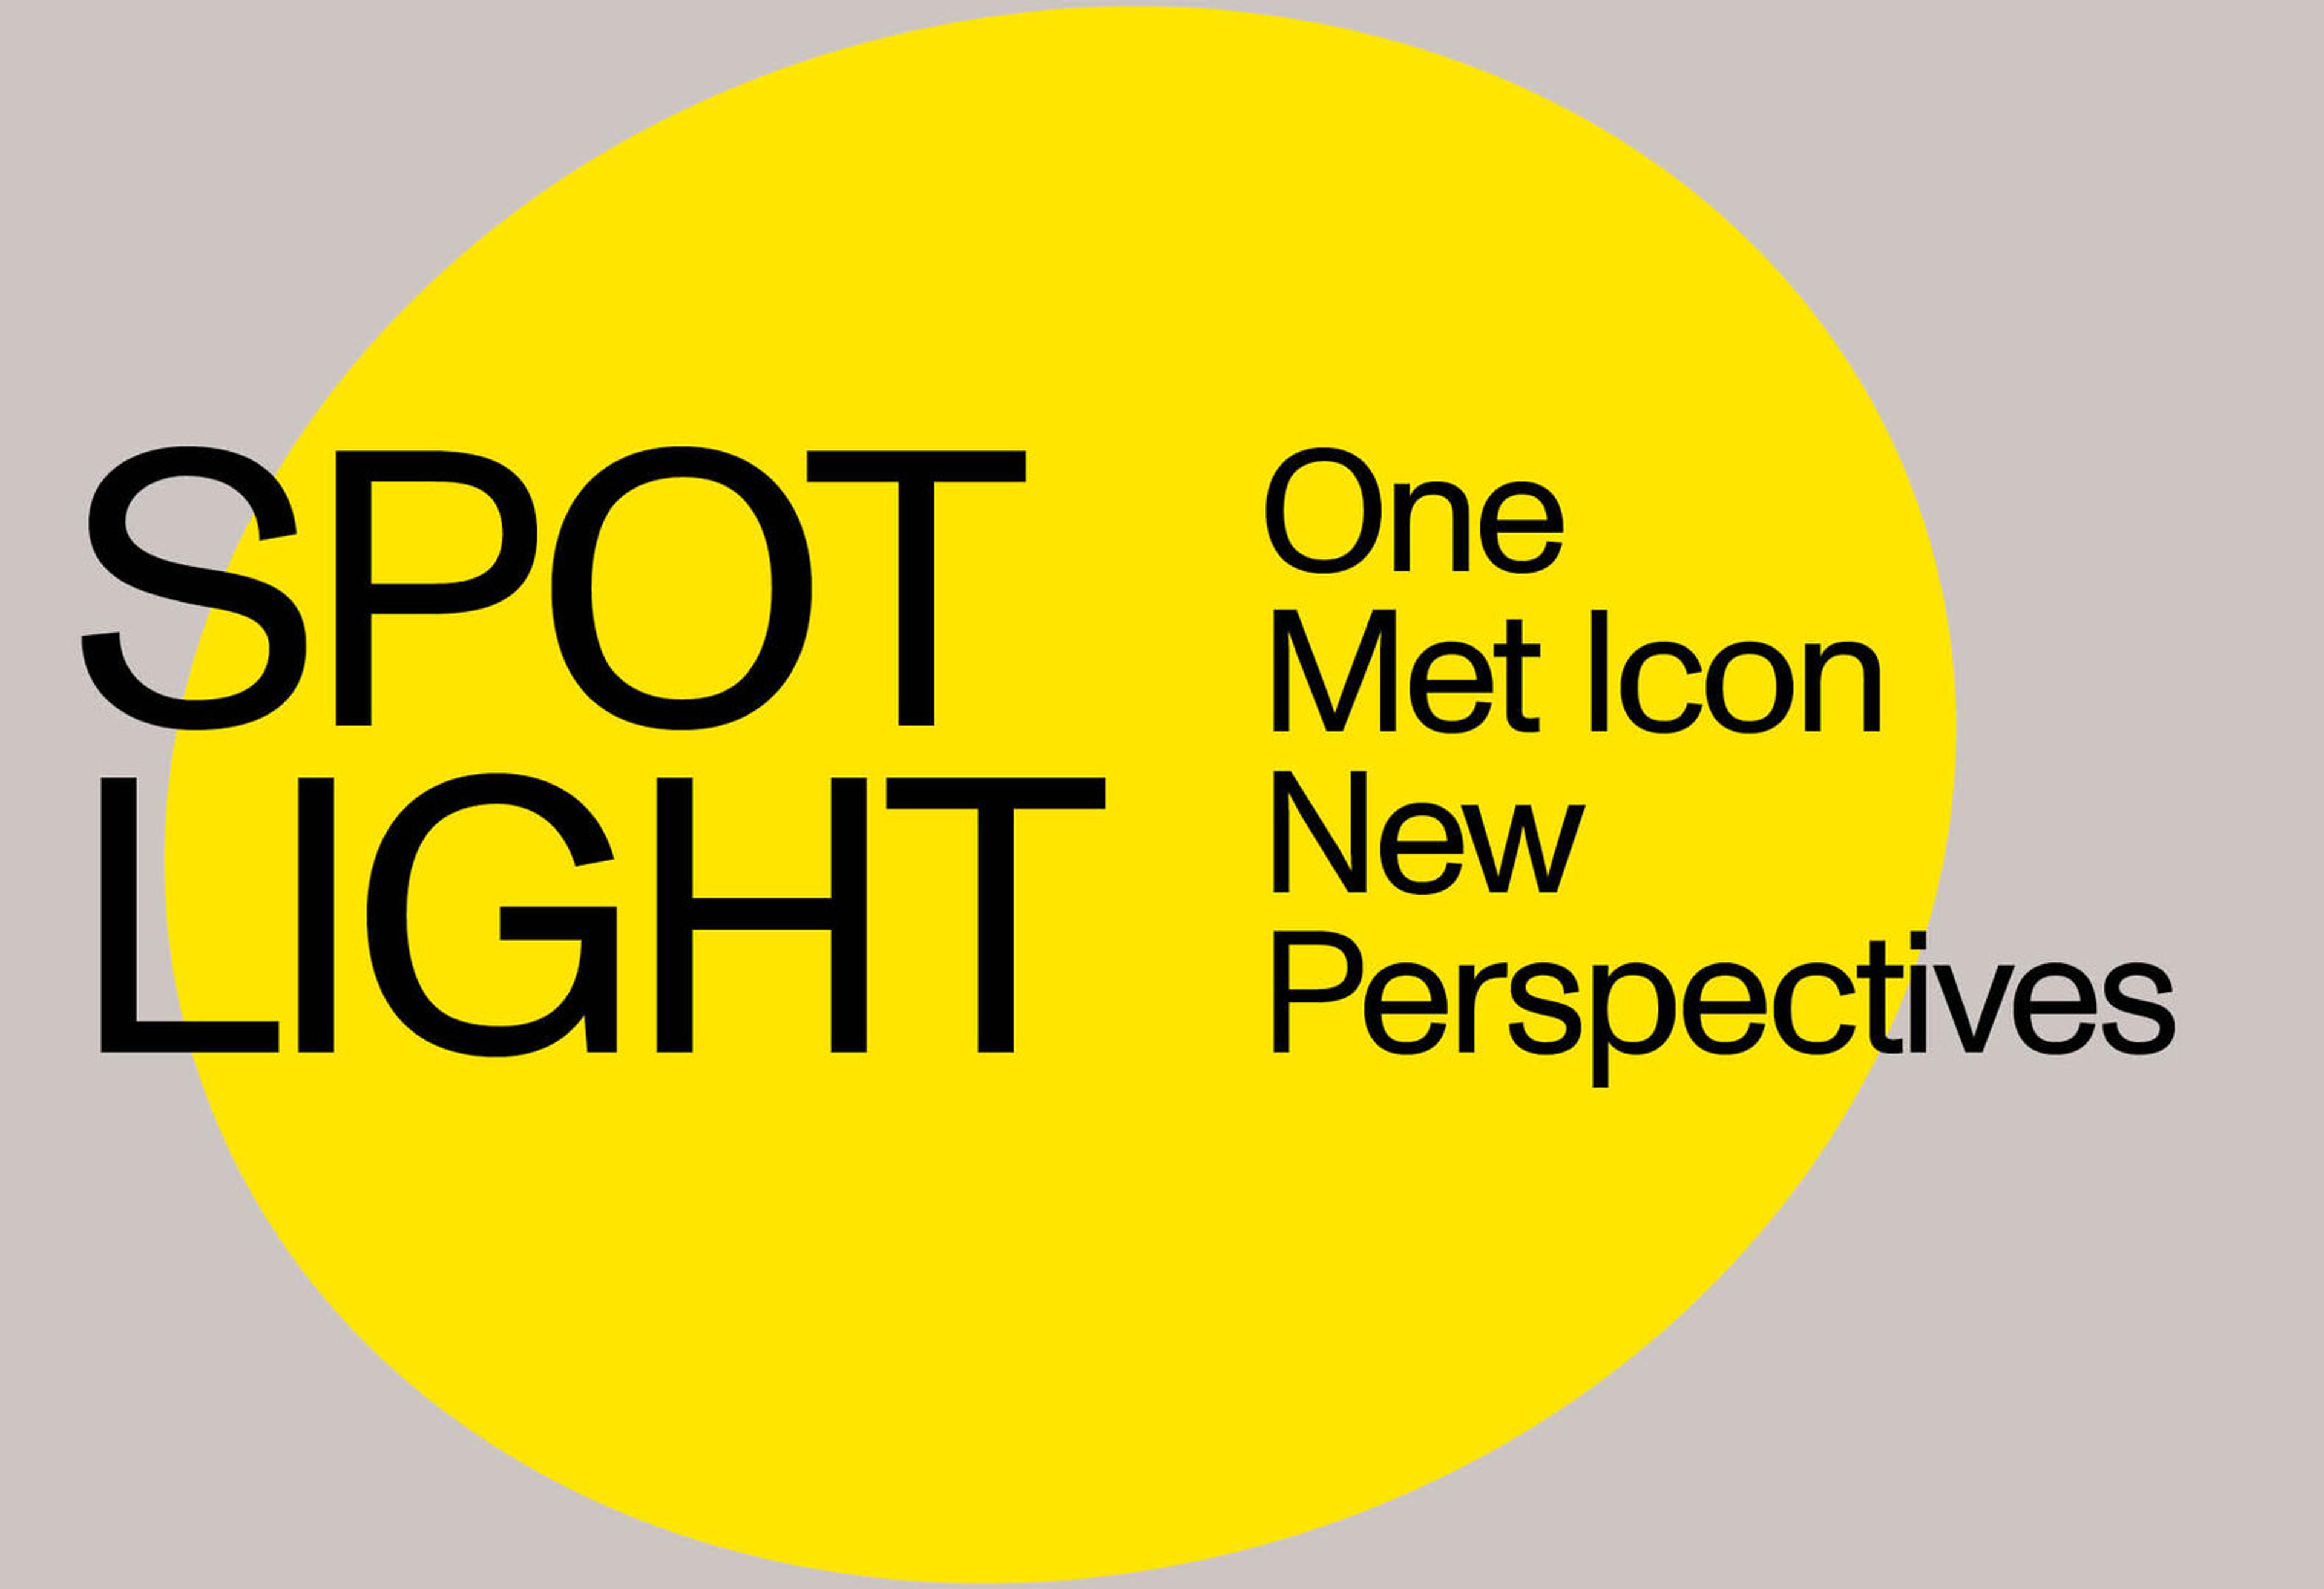 The text “Spotlight One Met Icon New Perspectives” appears atop a bright yellow ovular spotlight shape against a warm grey background.